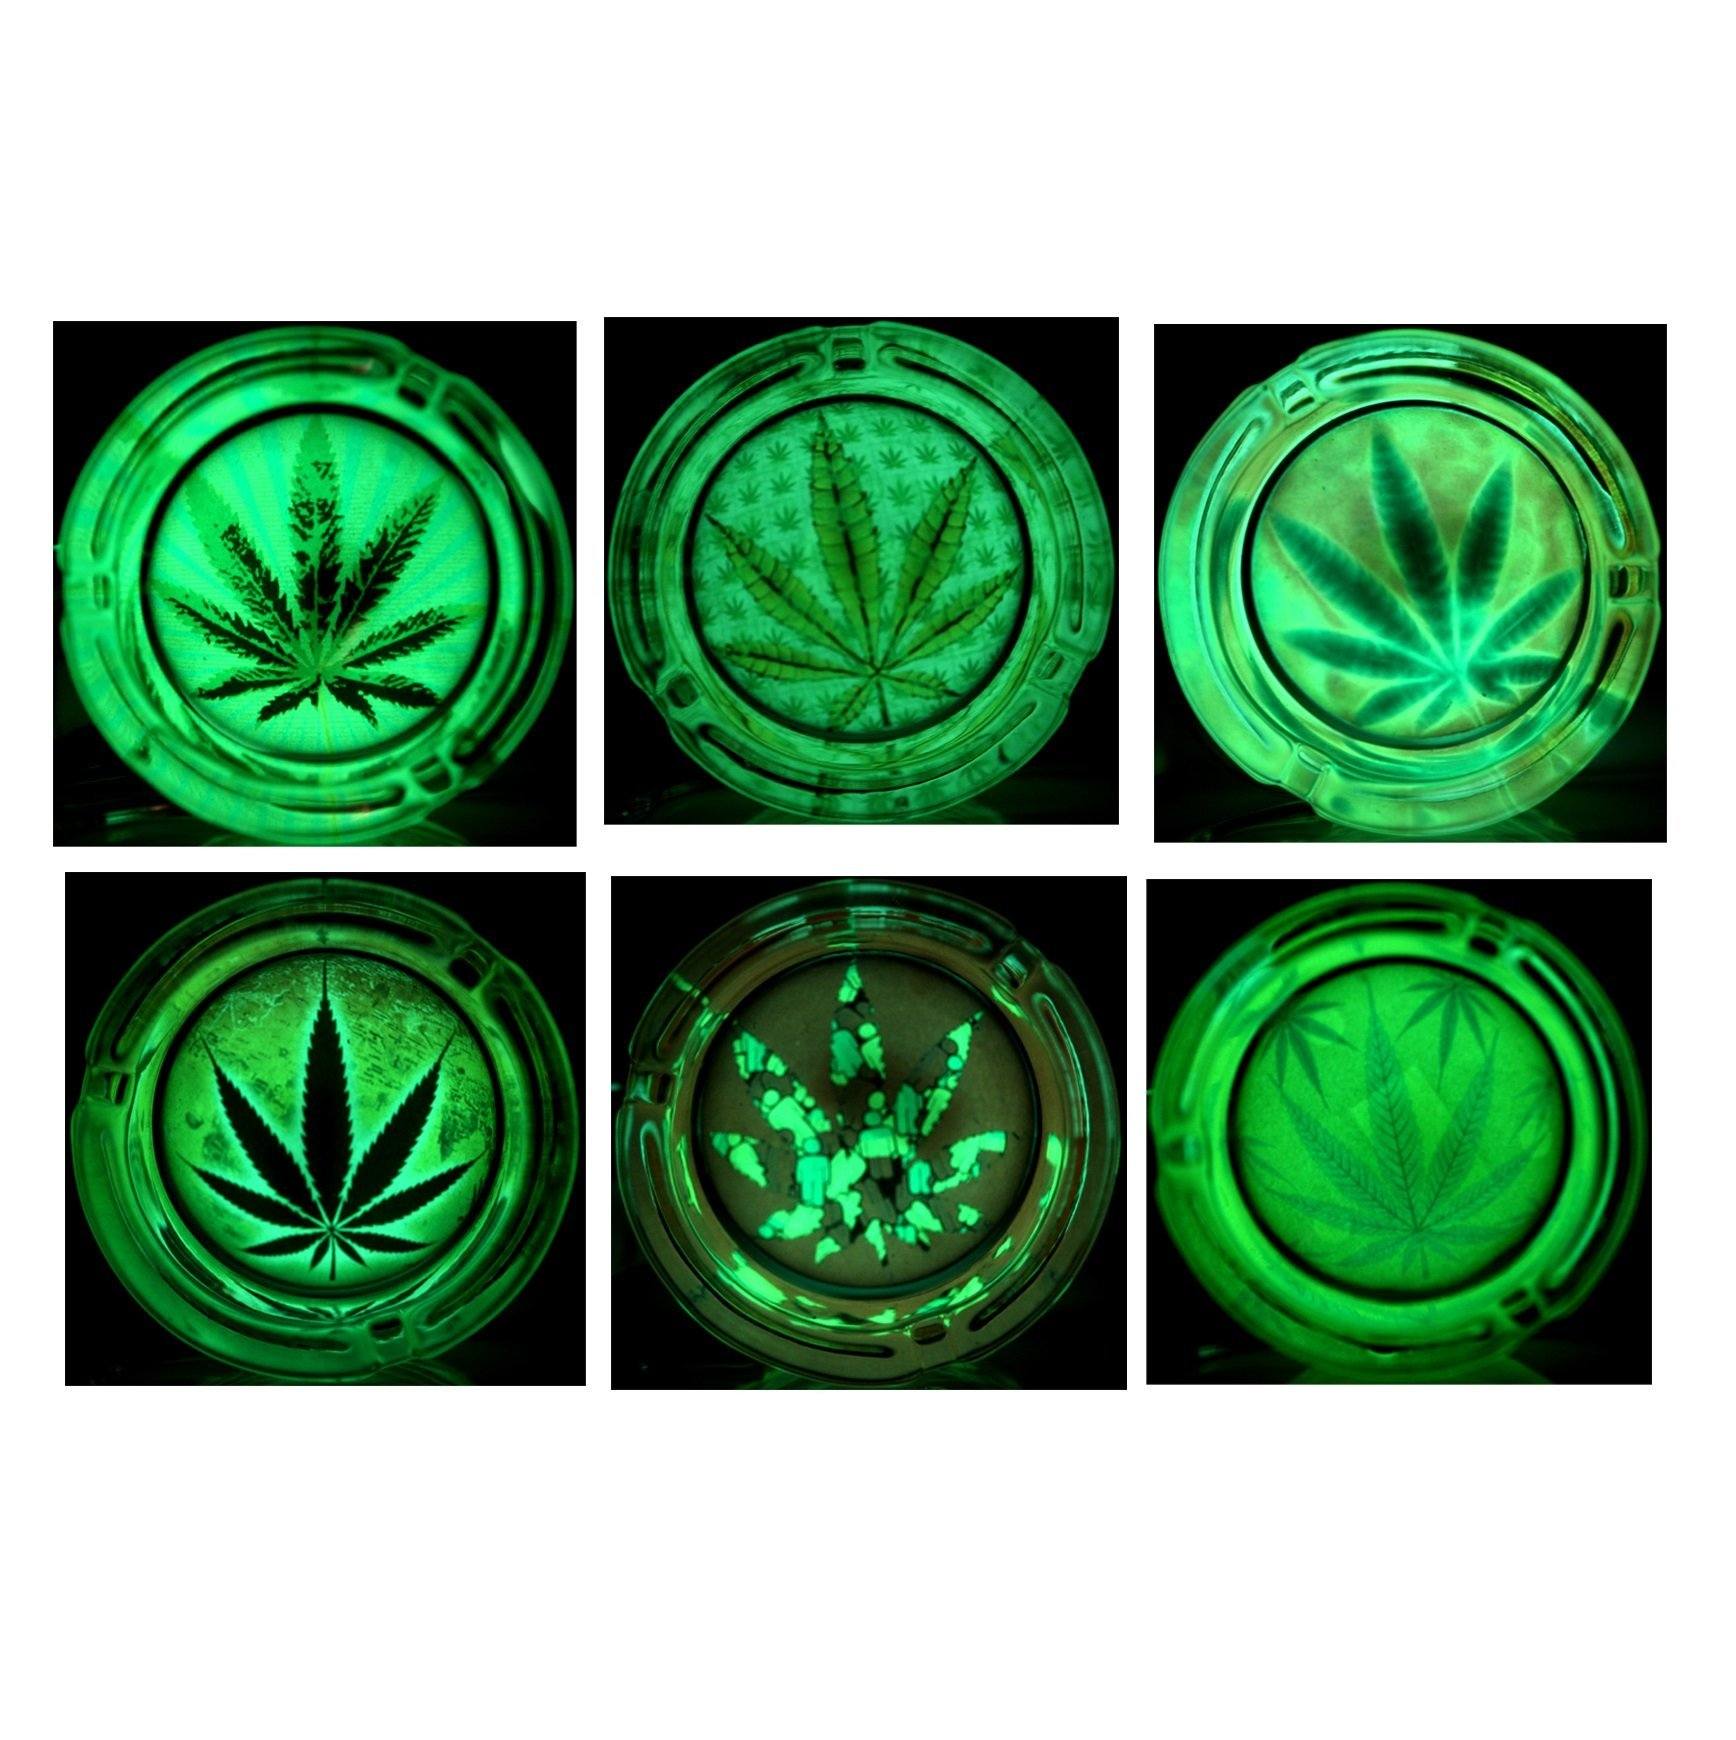 3.3" Glow In The Dark Glass Fashion Ashtray - #2 - (6 Count Display) Flower Power Packages 